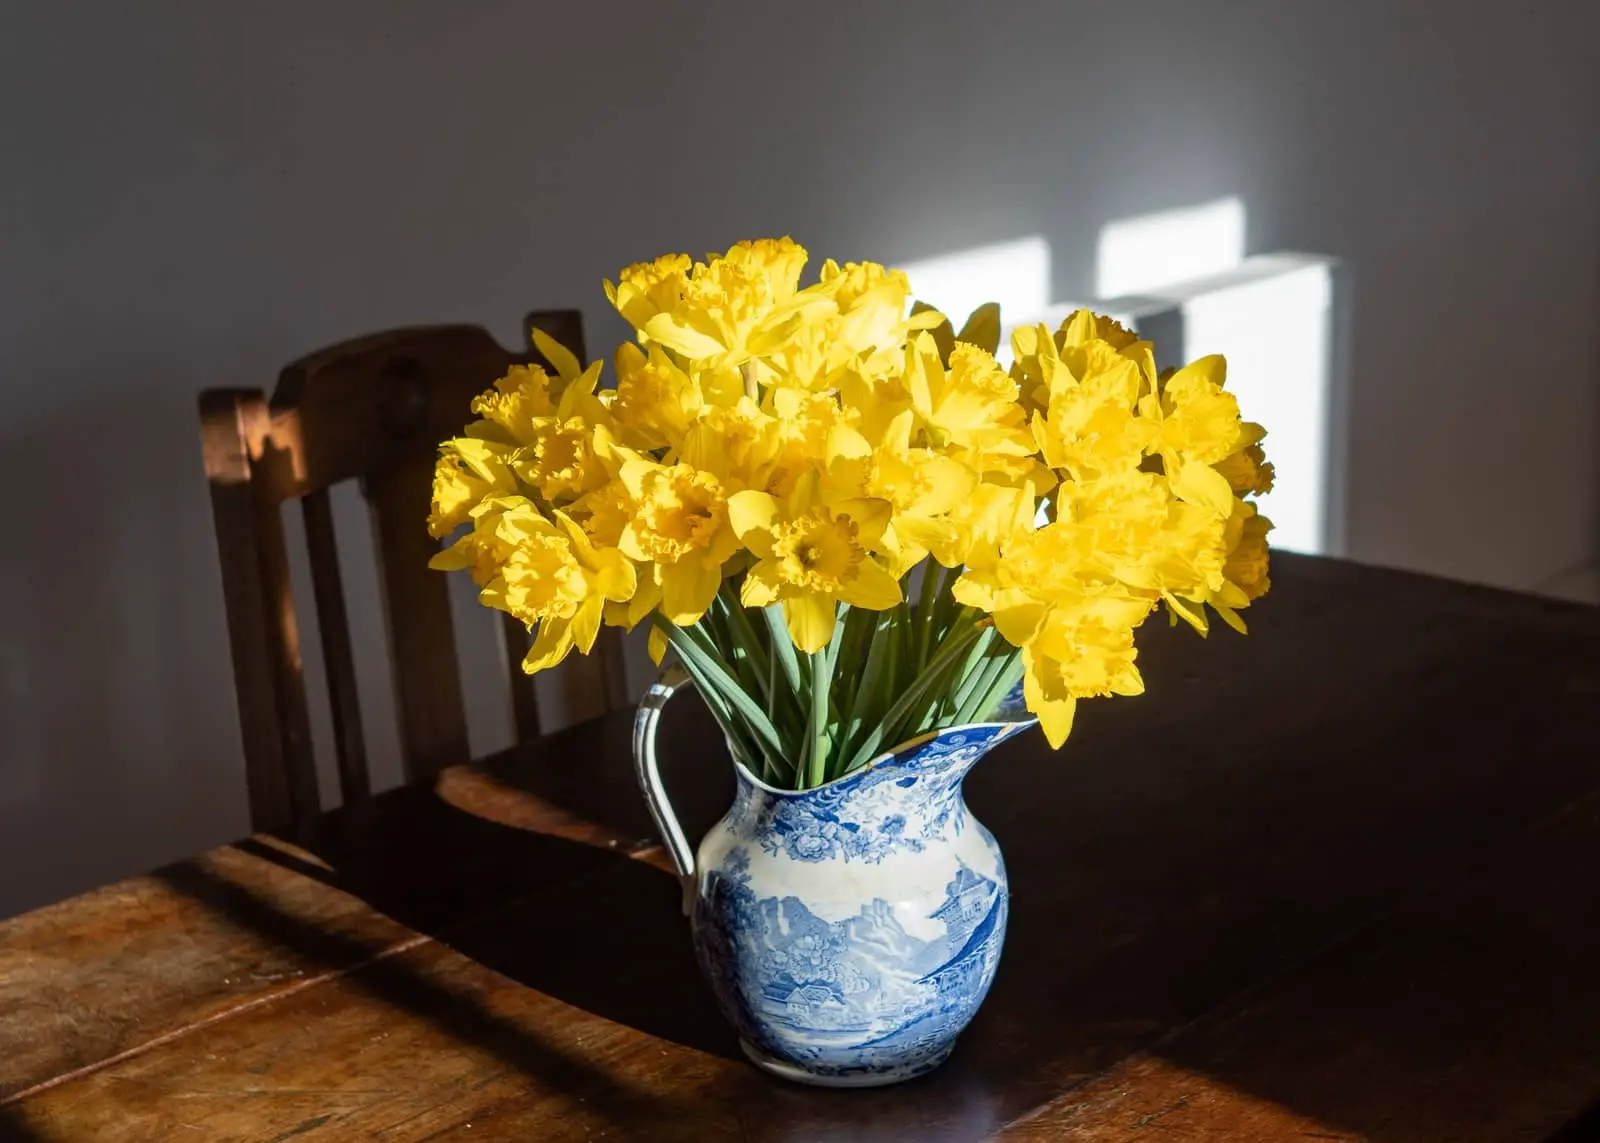 Vase with daffodils on a wooden table